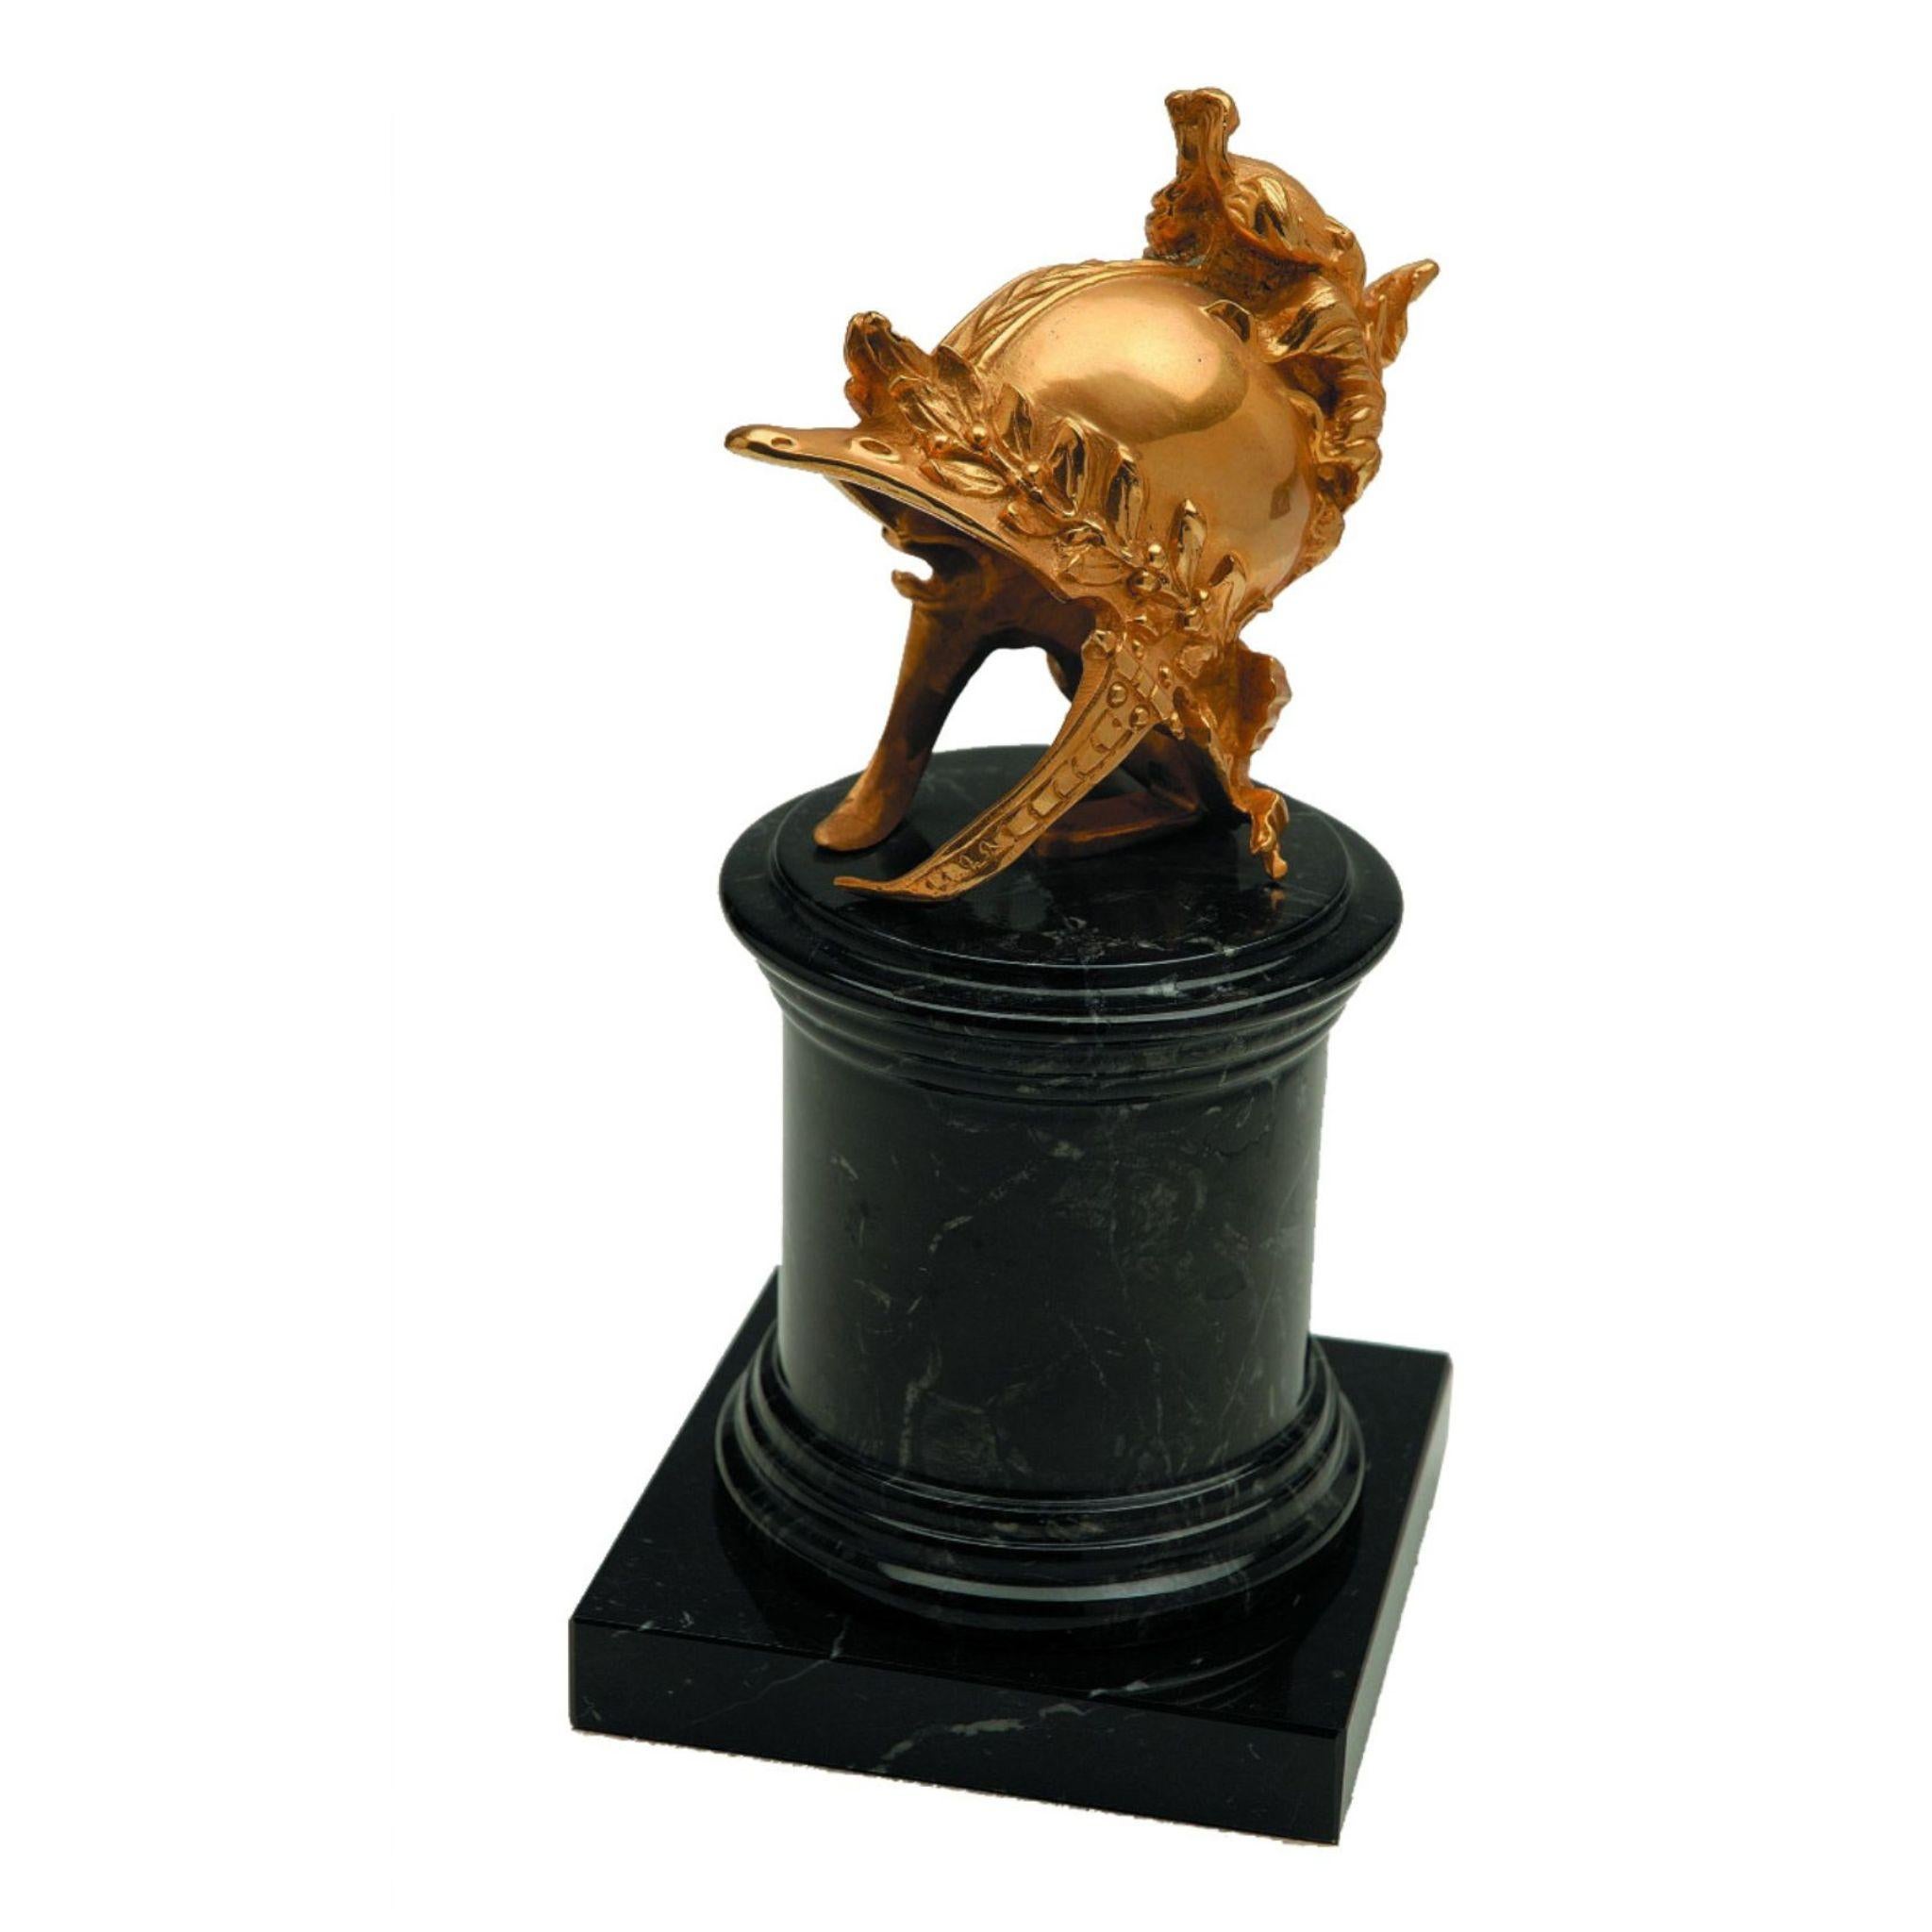 Add a touch of sophistication to any room with this natural brass helm, mounted on a sleek black marble base. The intricate detailing and high-quality construction make it a stunning decorative piece that's perfect for a wide range of decor styles.